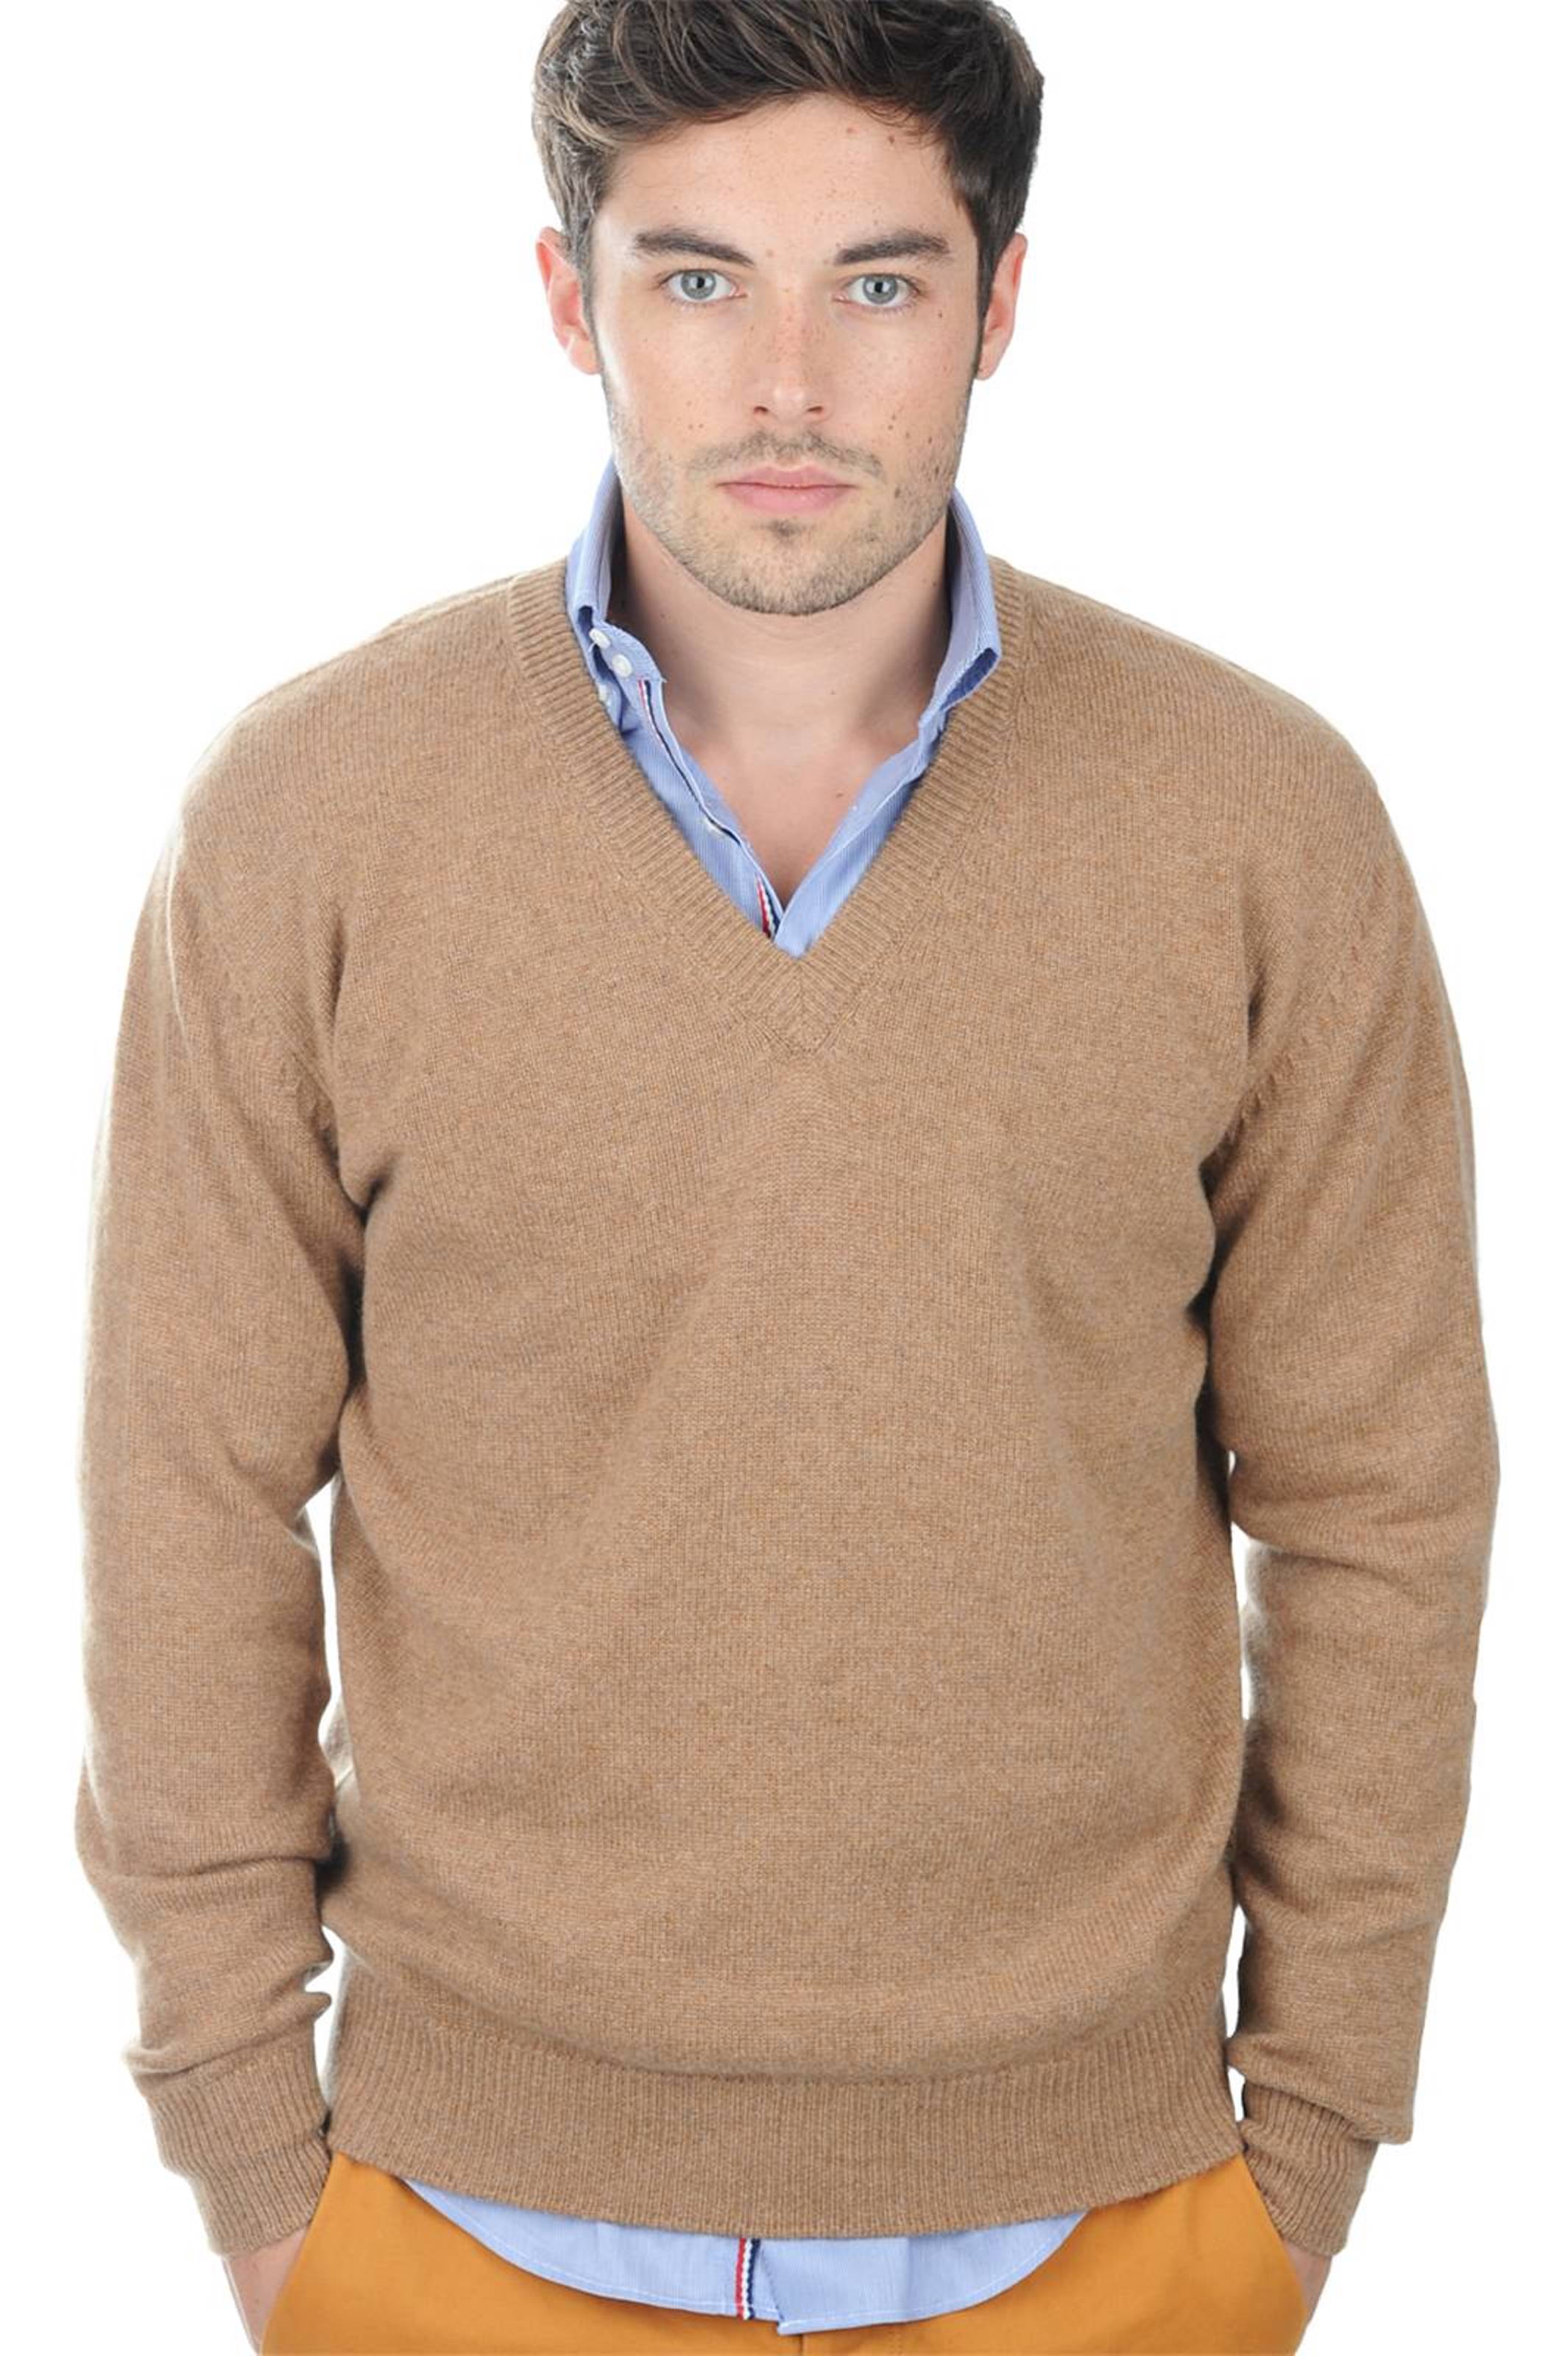 Cachemire pull homme hippolyte 4f camel chine 2xl